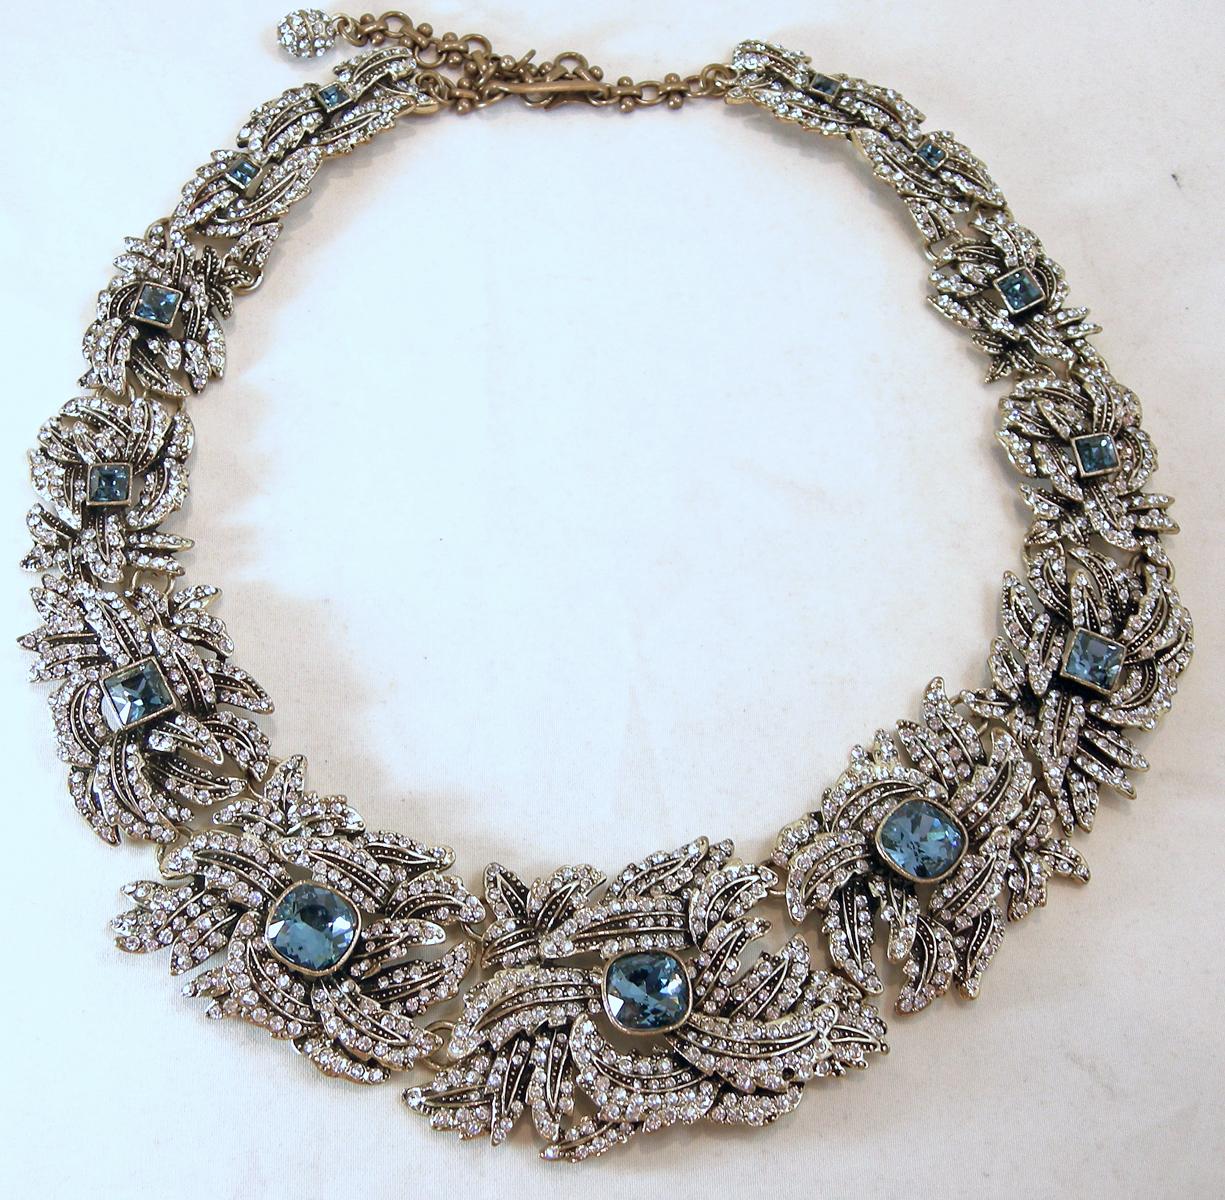 This vintage Heidi Daus necklace has a 3-dimensional design with clear crystals and accented with blue oval crystals in a gold tone setting. The necklace measures 23” x 1-3/4” with a hook clasp. It is signed “Heidi Daus” and is in excellent